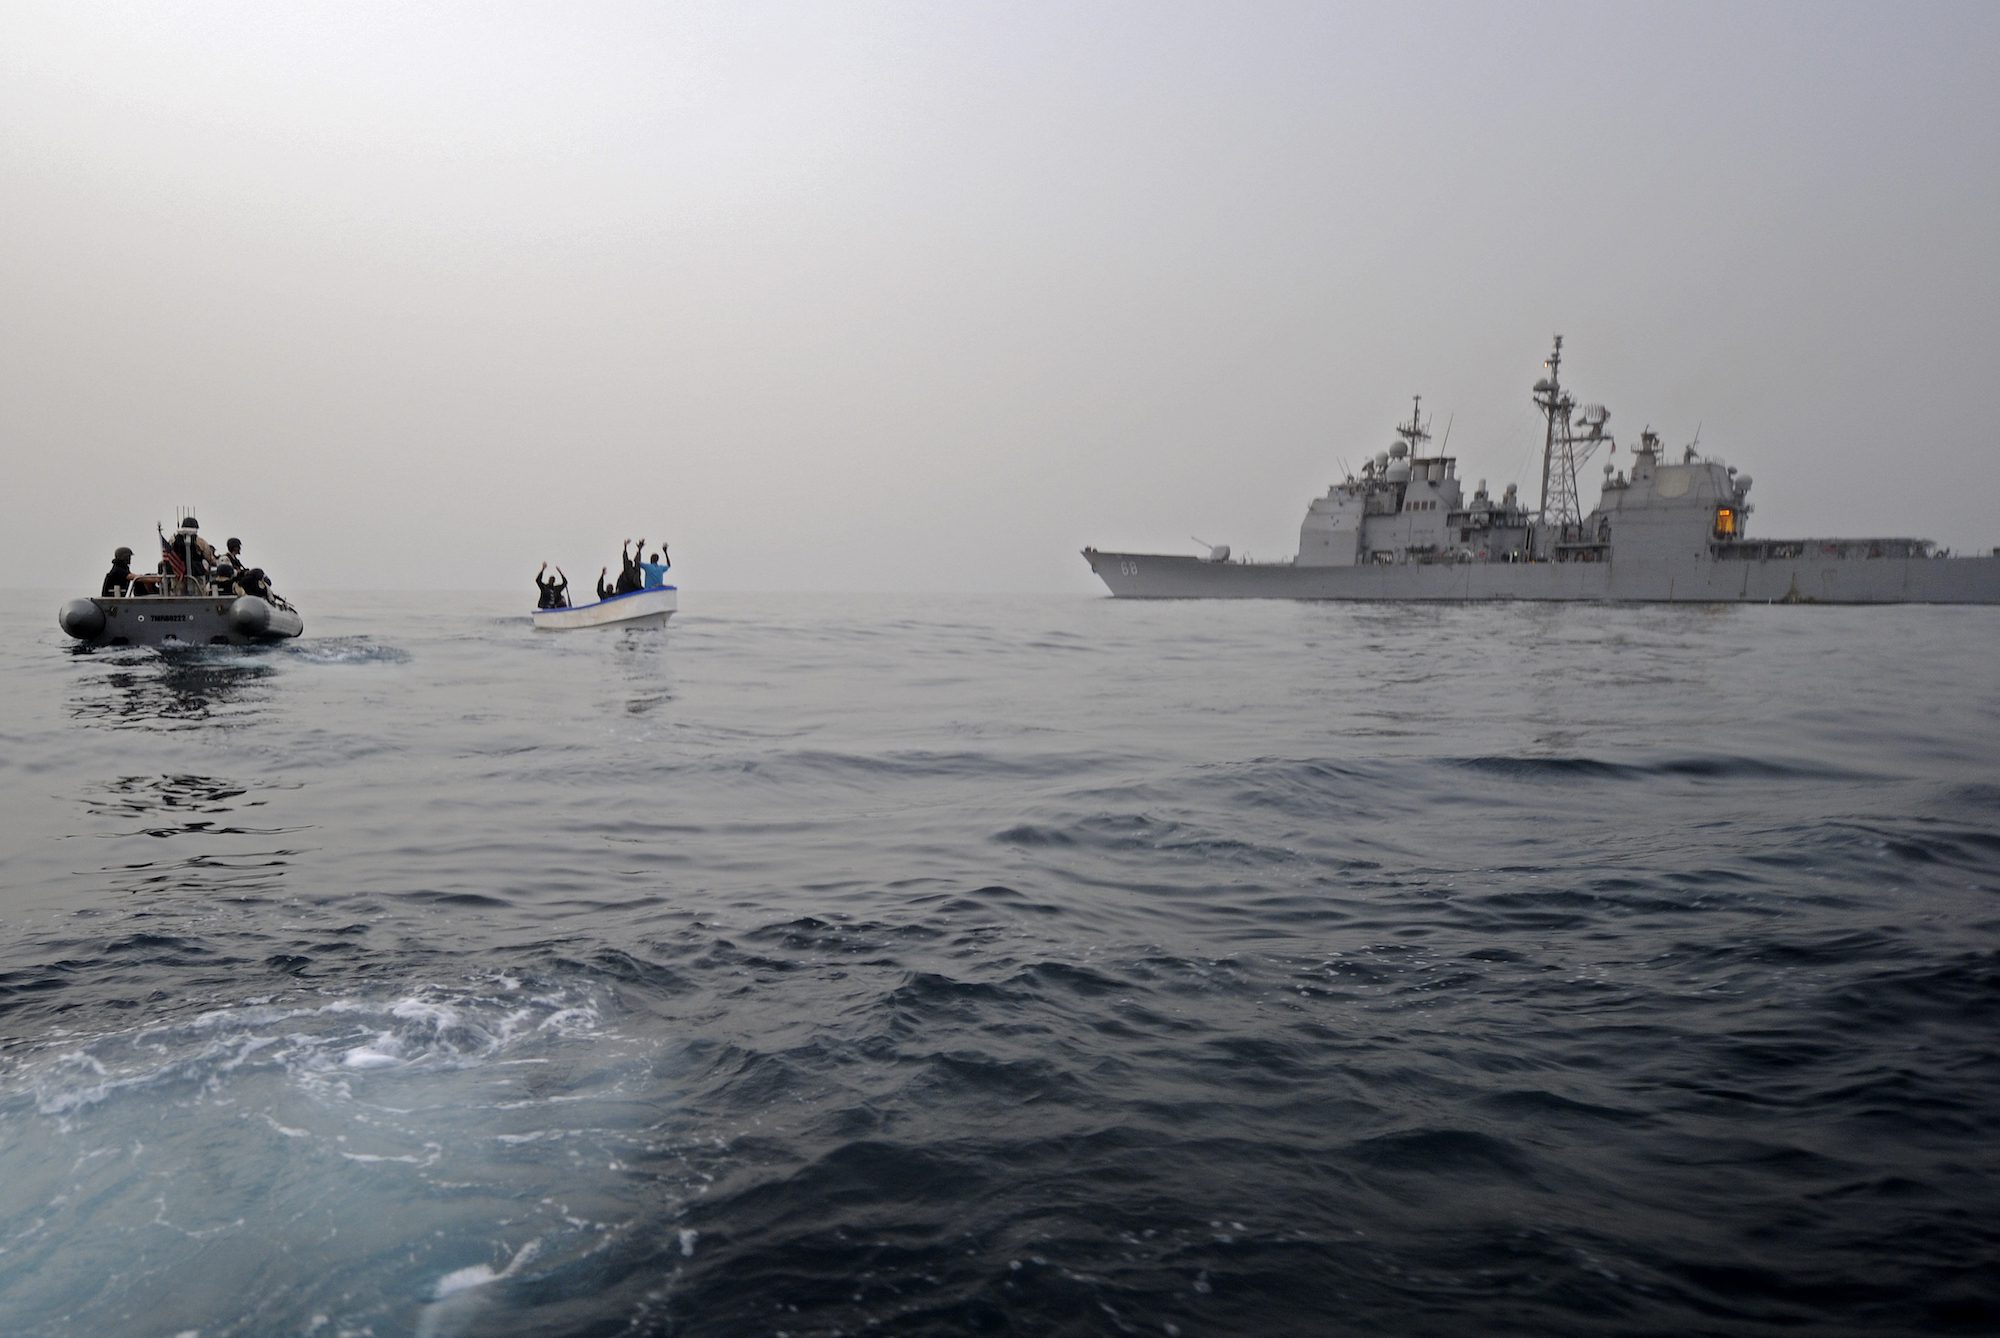 FILE PHOTO: A visit, board, search and seizure team assigned to the guided-missile cruiser USS Anzio investigates a suspected pirate skiff in the Gulf of Aden, July 22, 2011. U.S. Navy photo